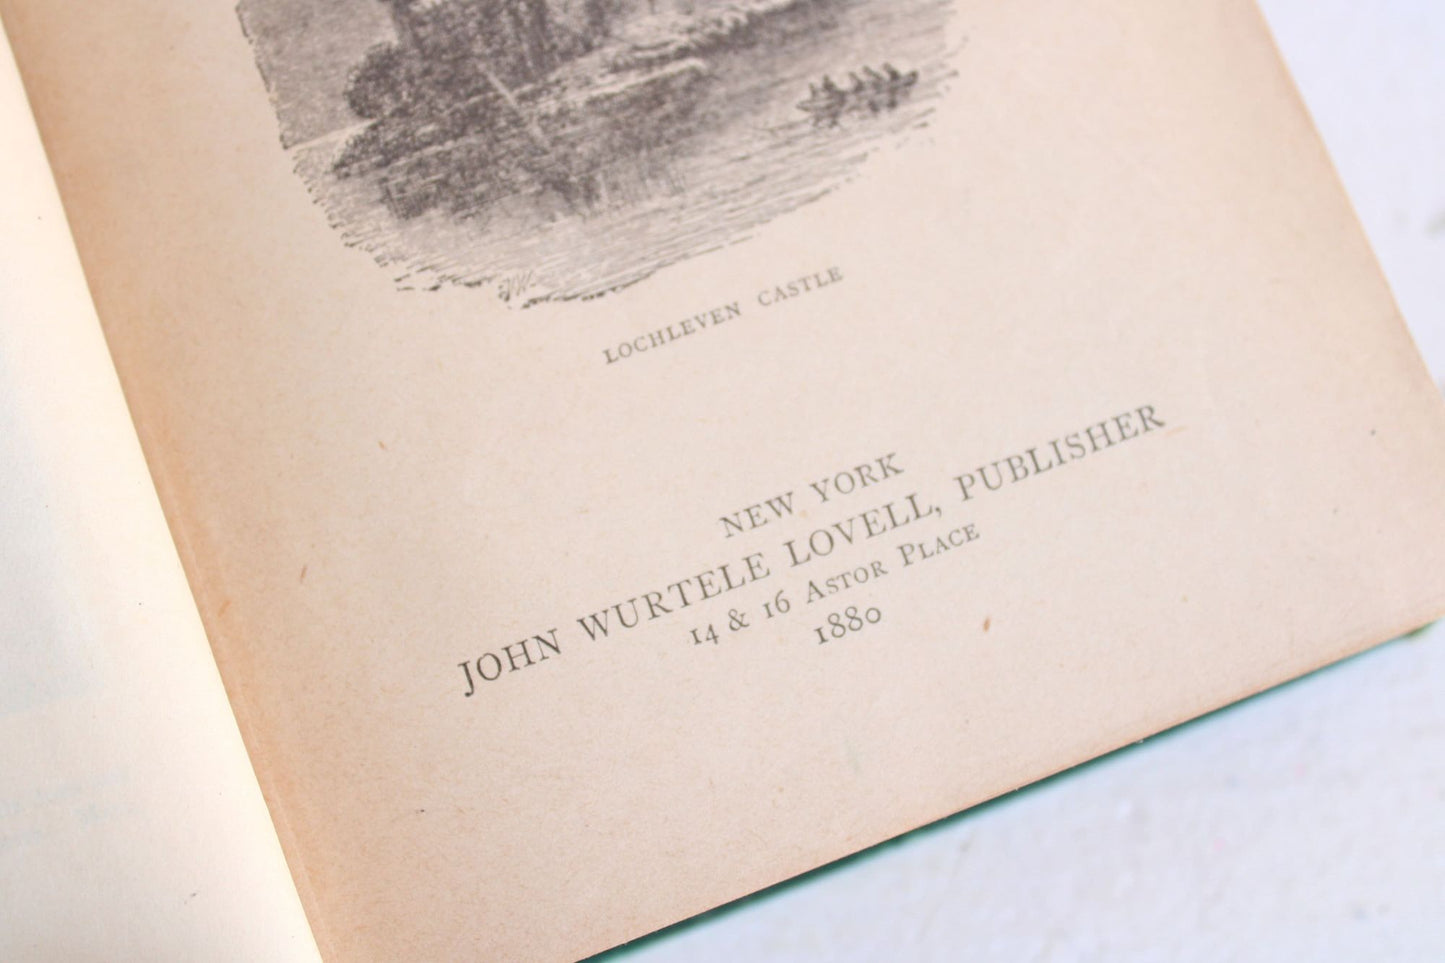 Vintage 1880s Book, Sir Walter Scott,  The Waverly Novels, The Abbot Sequel to The Monastery